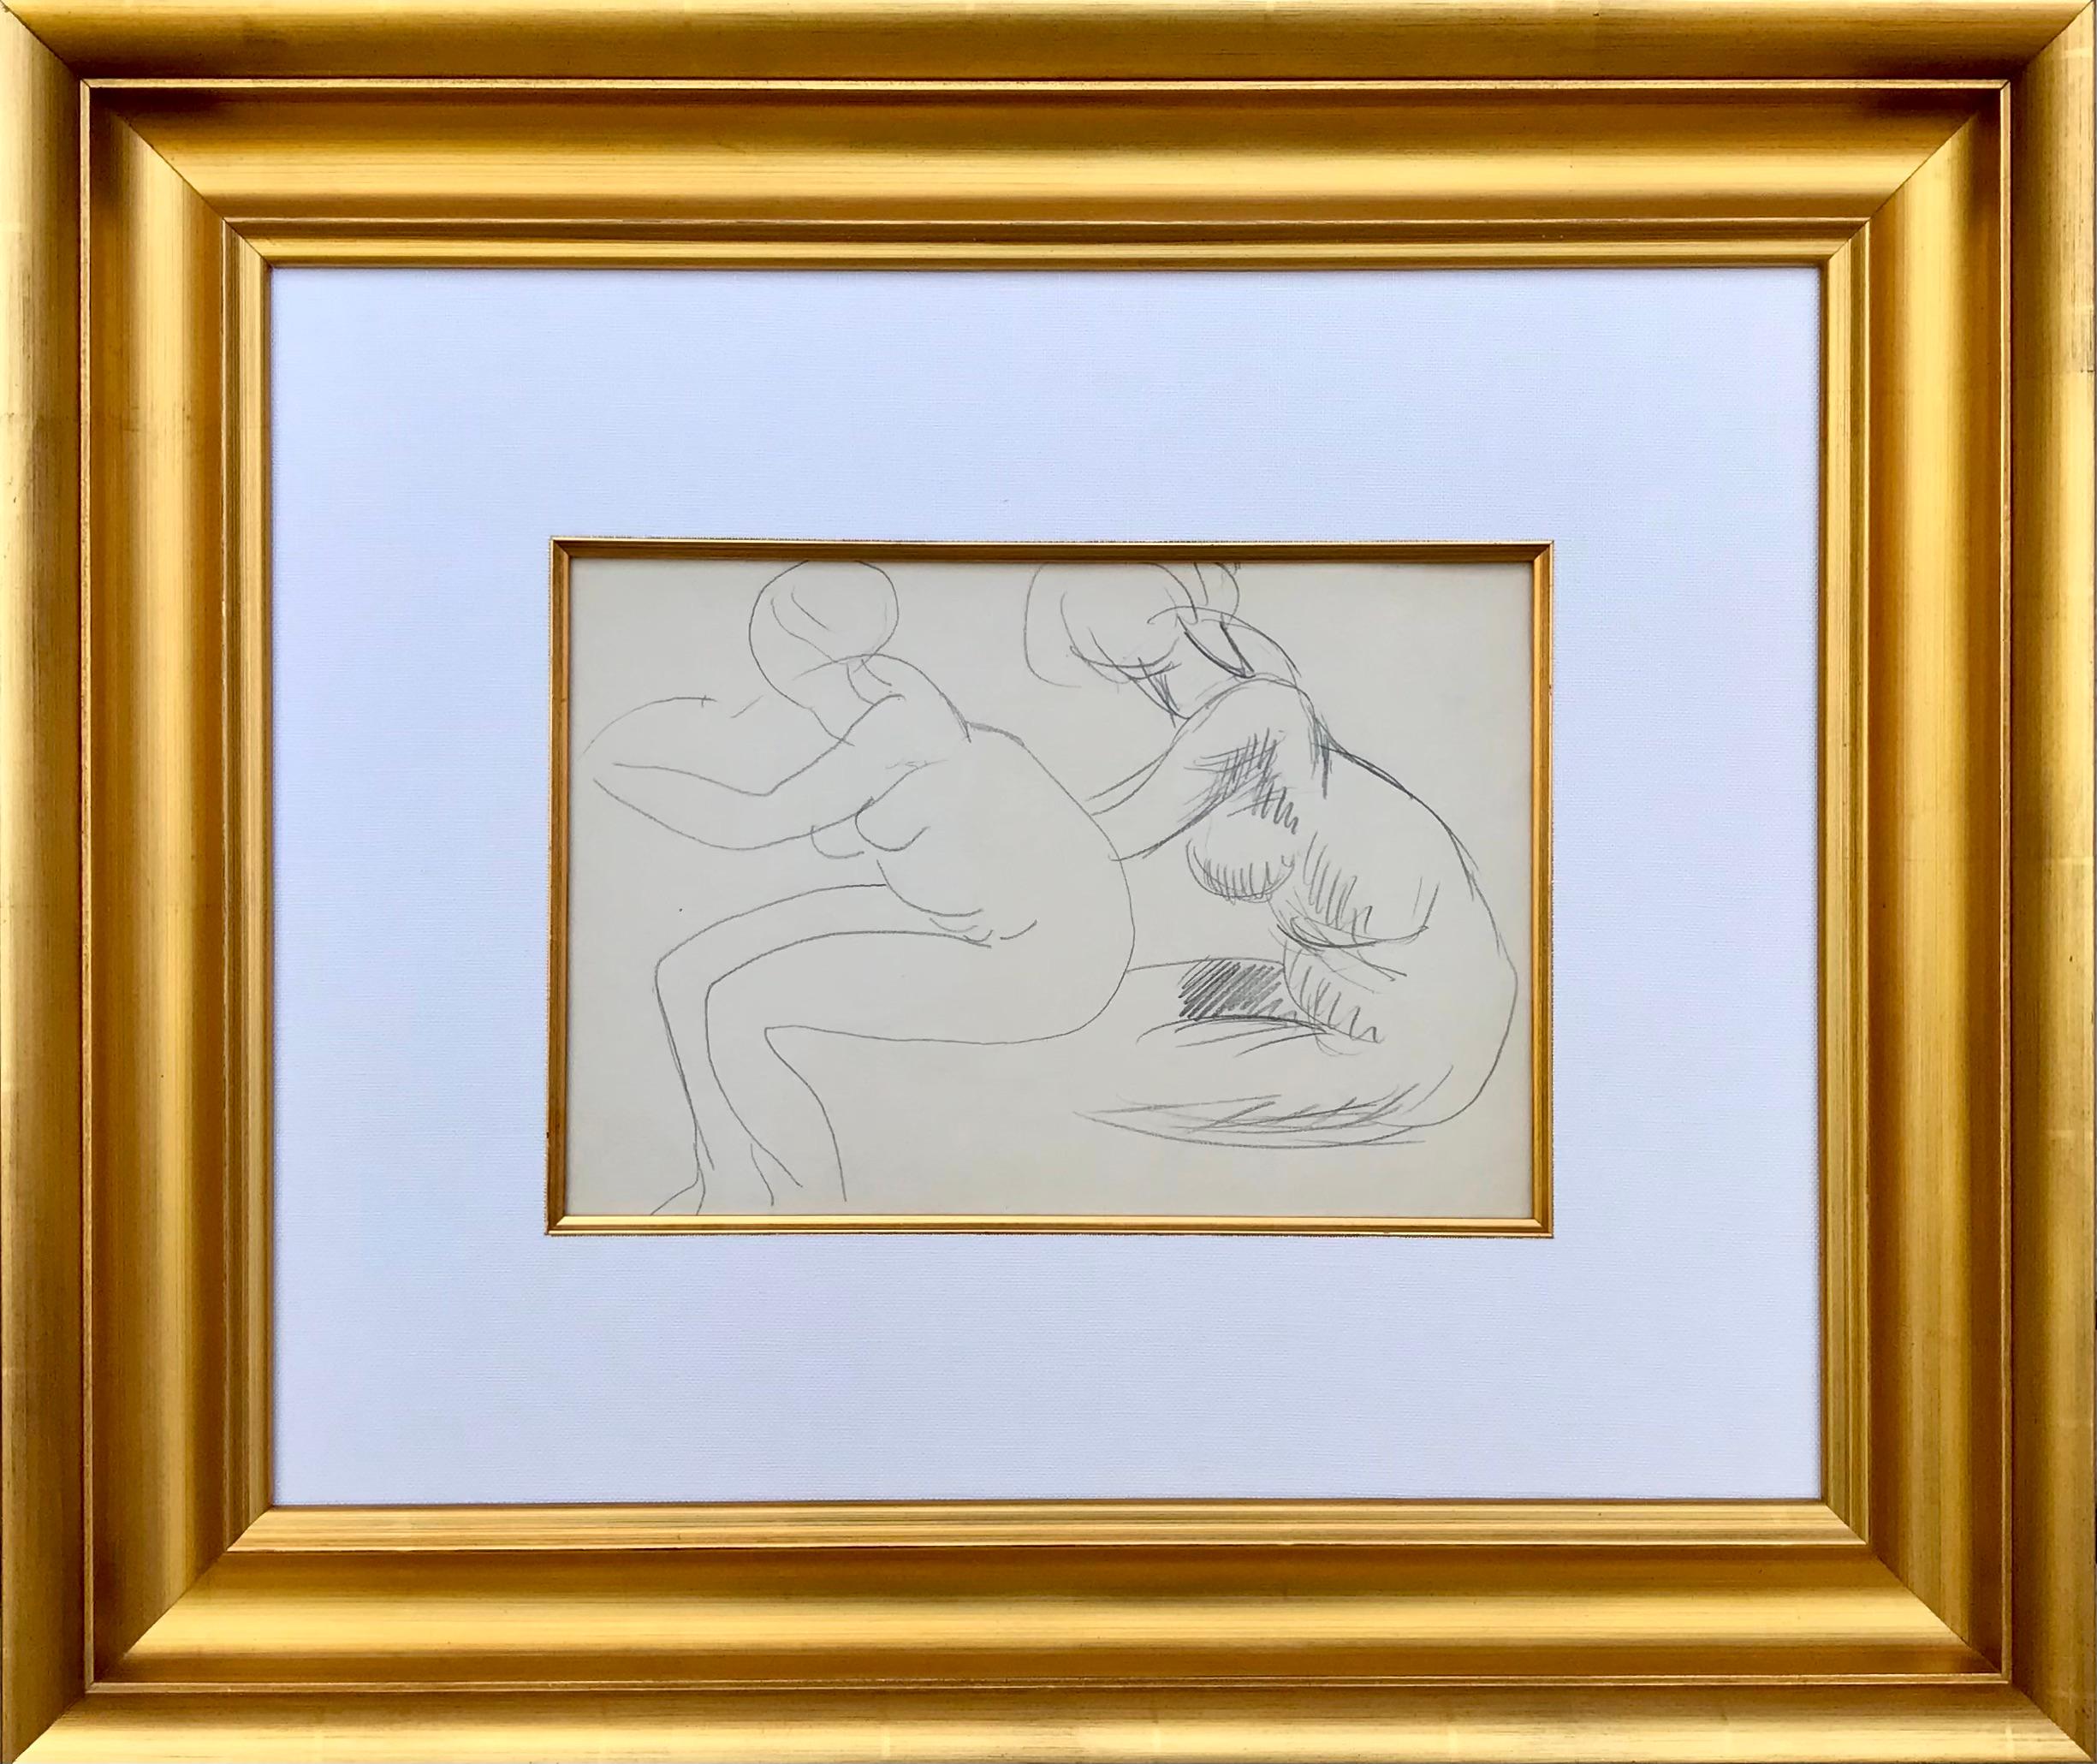 Henri Matisse Original Pencil On Paper Study Of A Nude 
Pencil on paper 
Unsigned.
Sheet: 8.85 x 13.75 Inches 
Framed: 25.5 x 21.75 Inches

The authenticity of this work has been confirmed by Georges Matisse. A catalogued (COA) Certificate Of